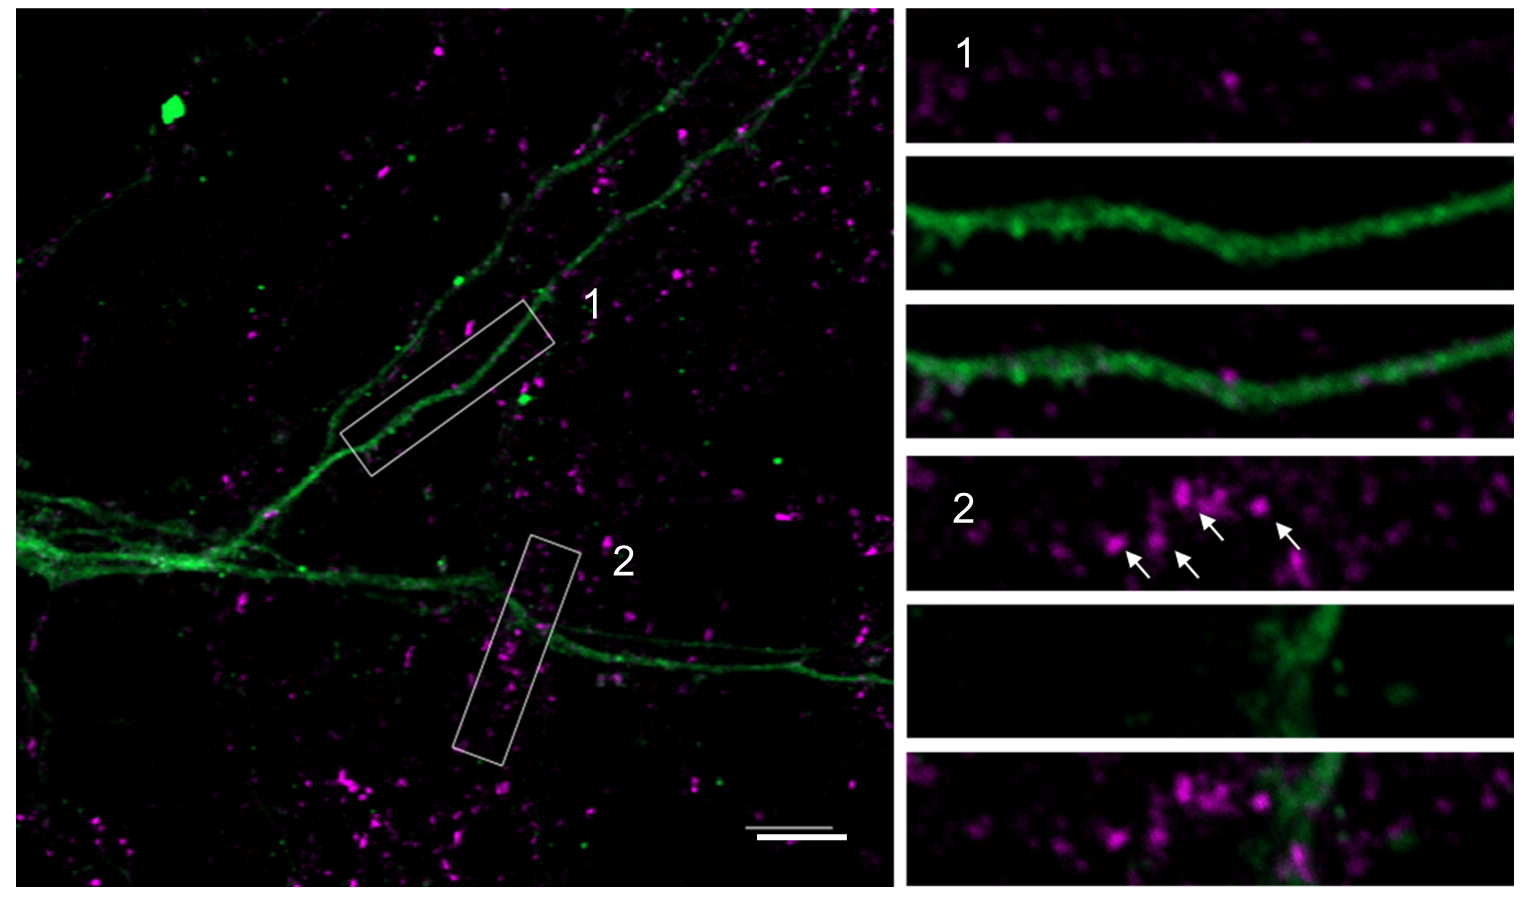 Series of micrographs of synapses in stressed mice with mutated SHANK3 gene showing high expression of HOMER1A protein and loss of SHANK3.